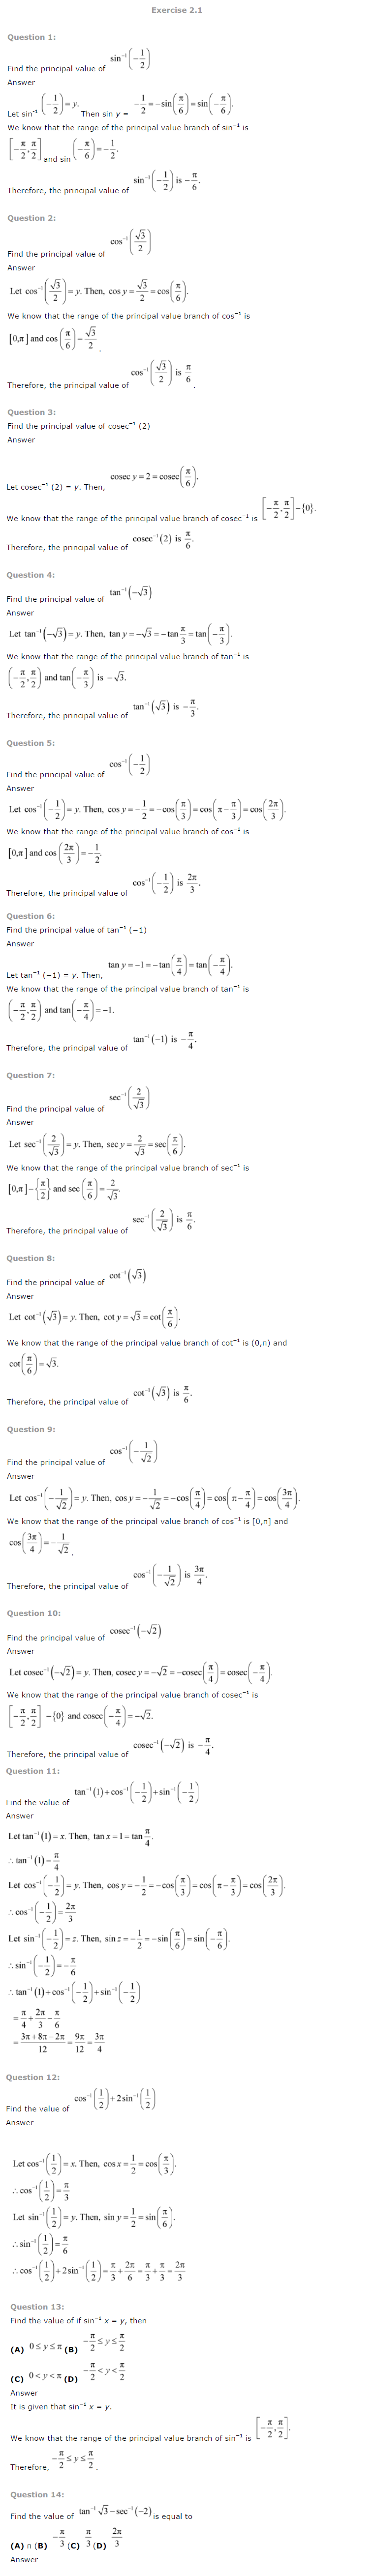 NCERT-Solutions-For-Class-12-Maths-Chapter-2-Inverse-Trigonometric-Functions-1